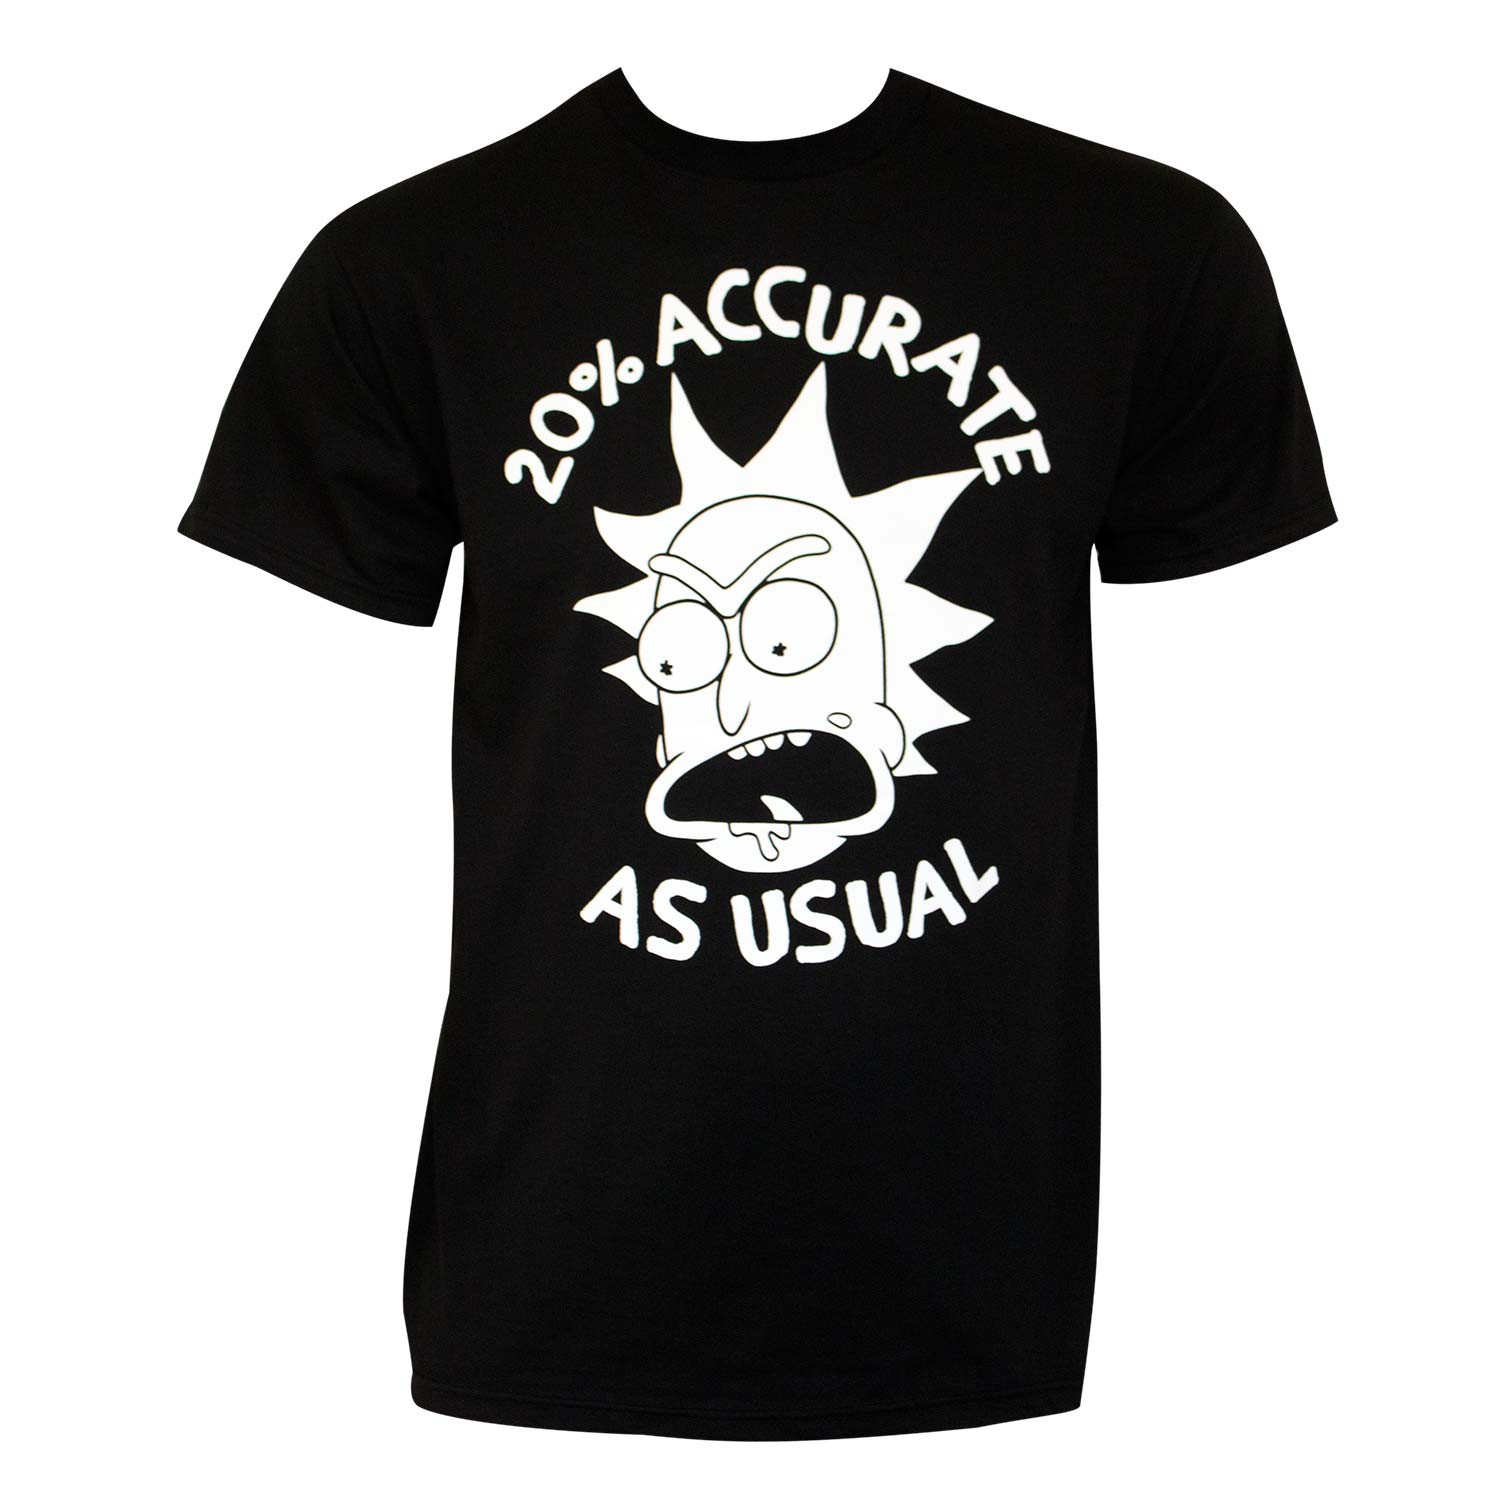 Rick And Morty Men's Black 20% Accurate T-Shirt